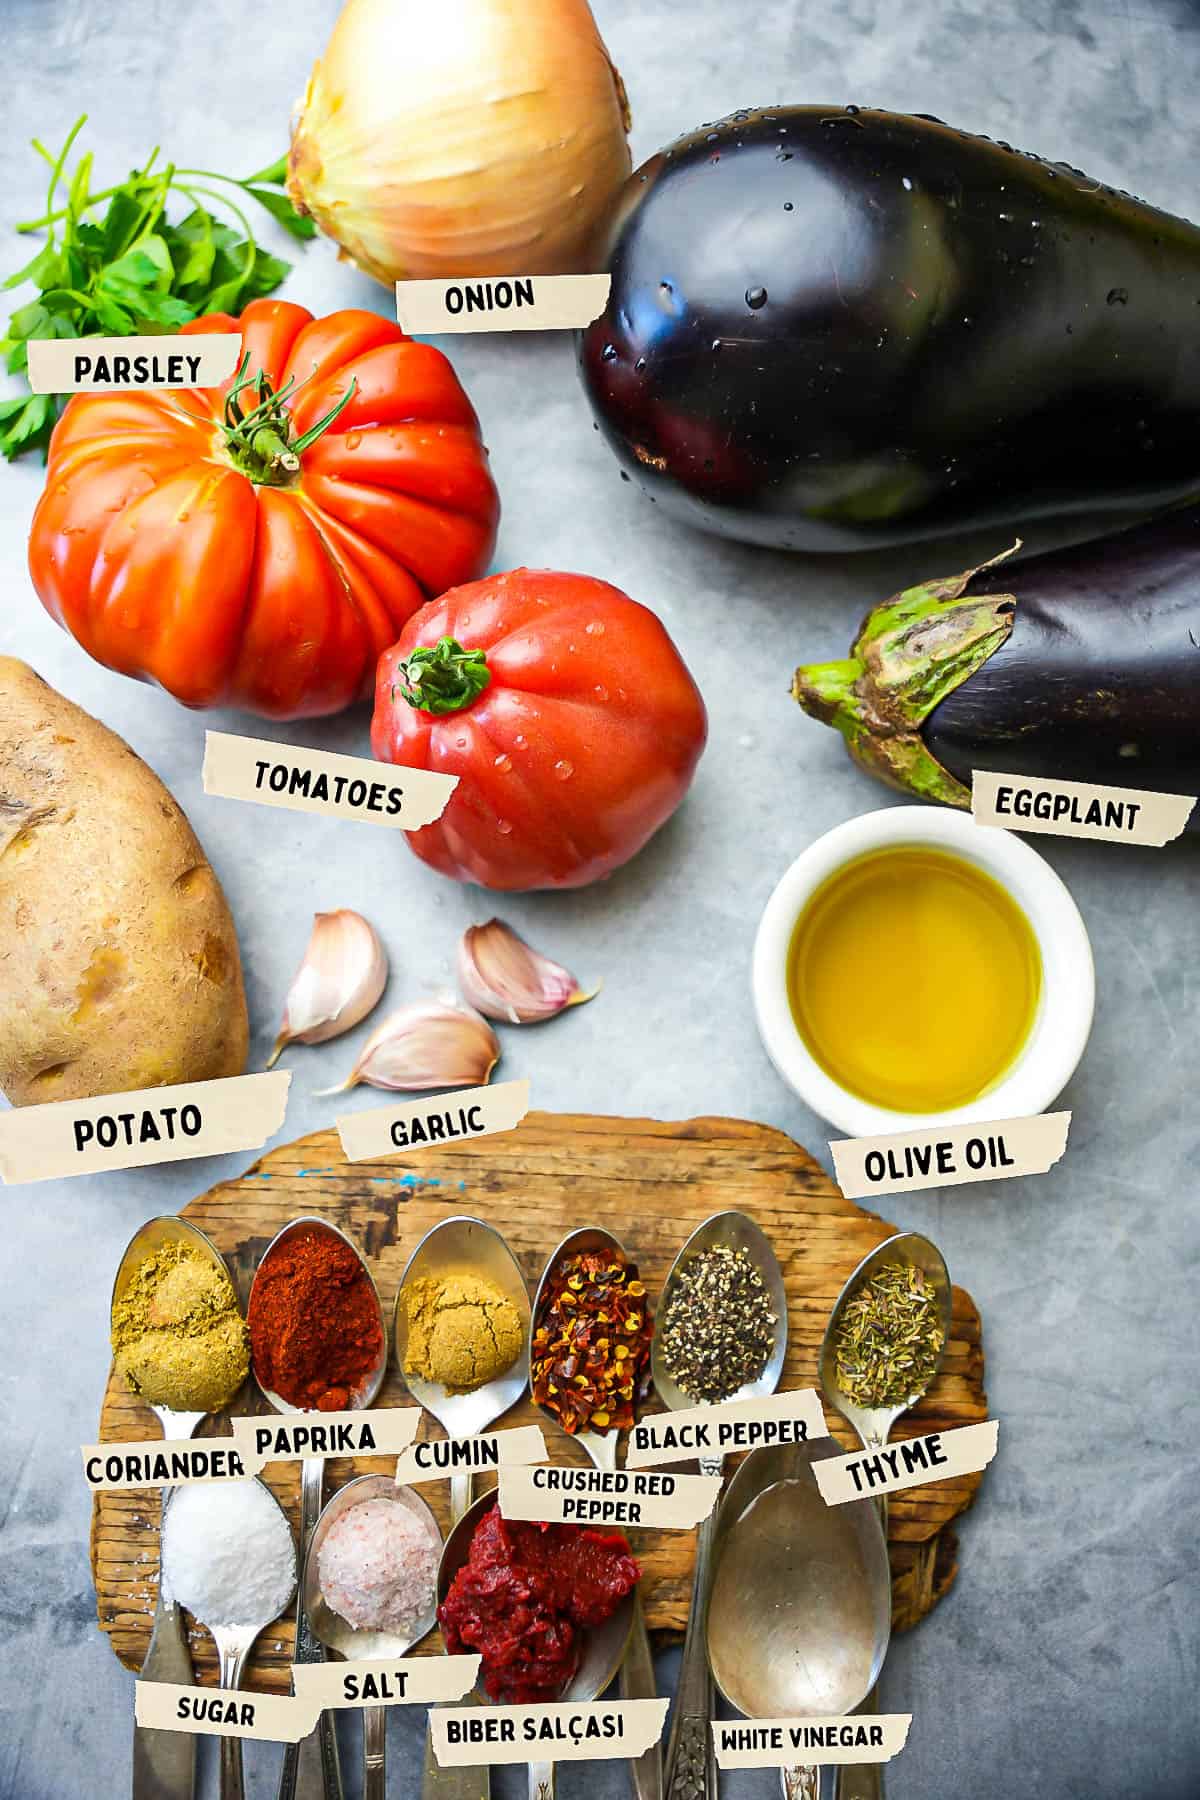 şakşuka ingredients laid out and labeled on a stone counter. All of the spices are in silver spoons on a wooden board.